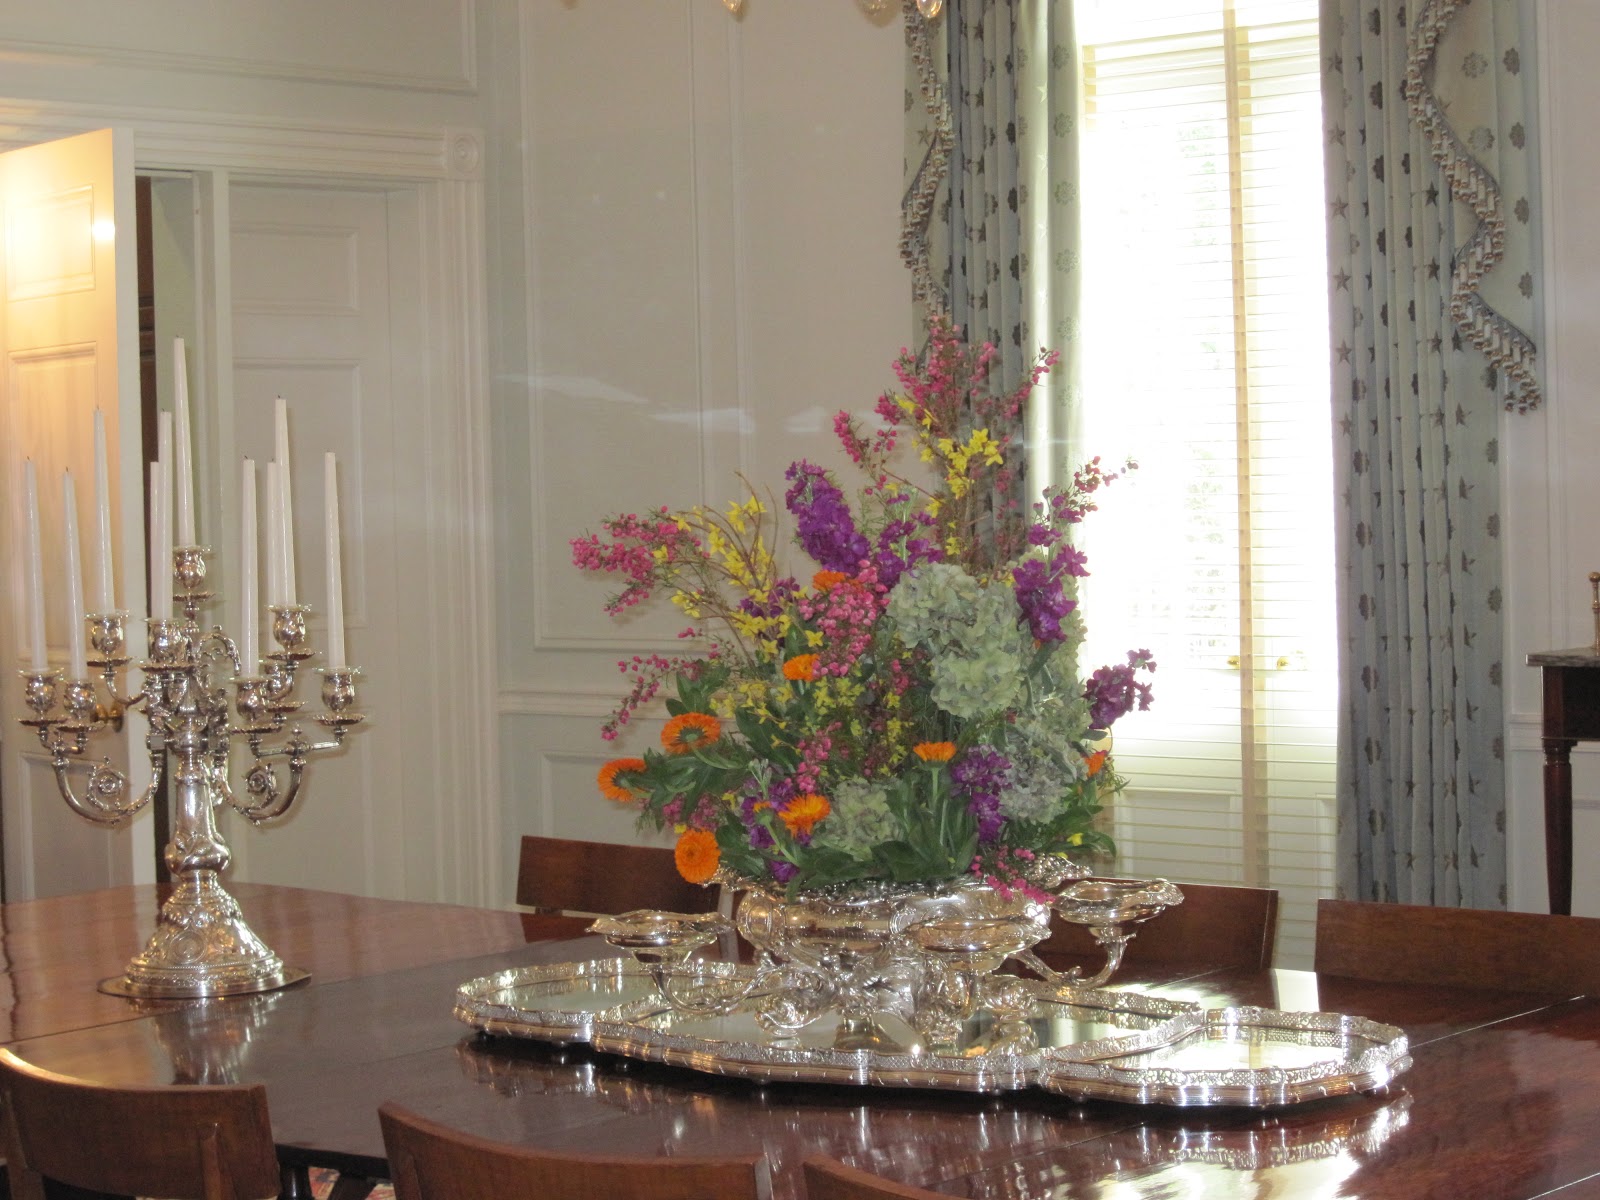 The next stop on our tour was the formal dining room. title=